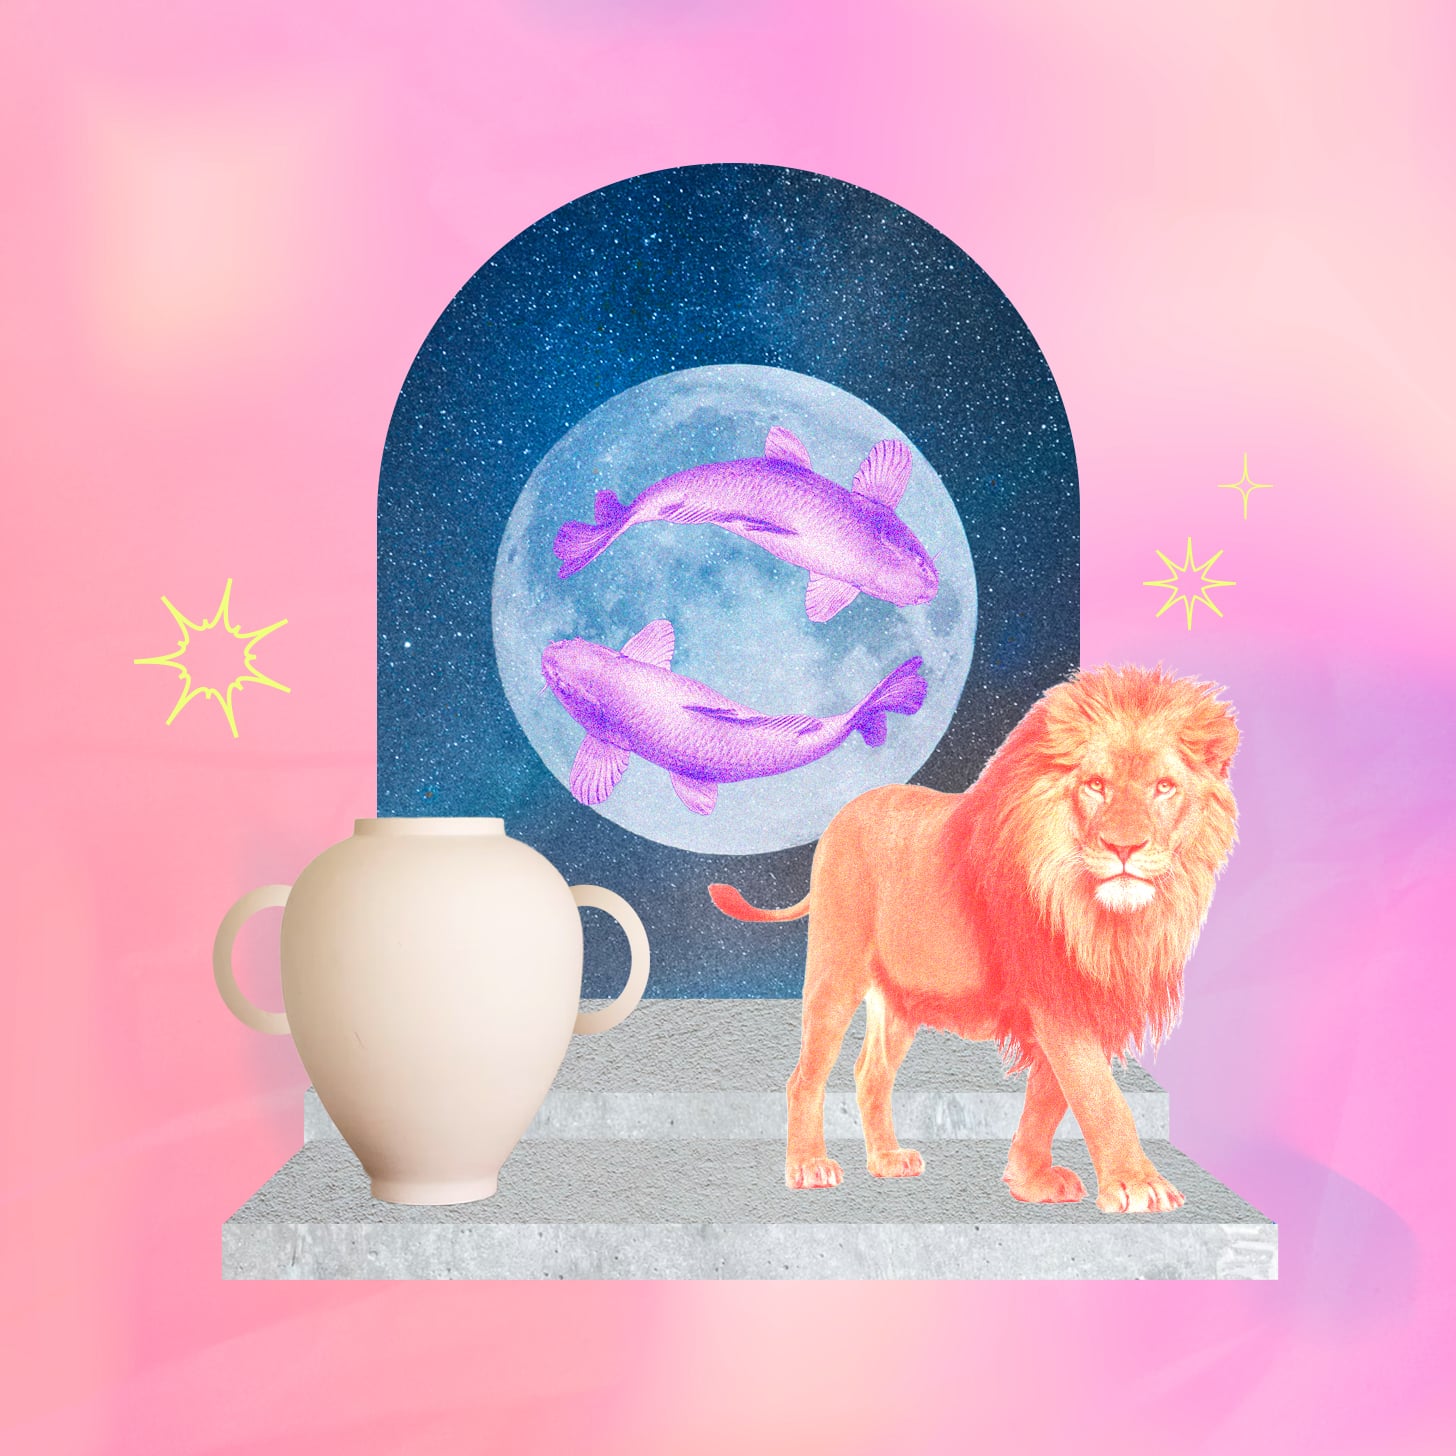 Weekly horoscope for July 3, 2022